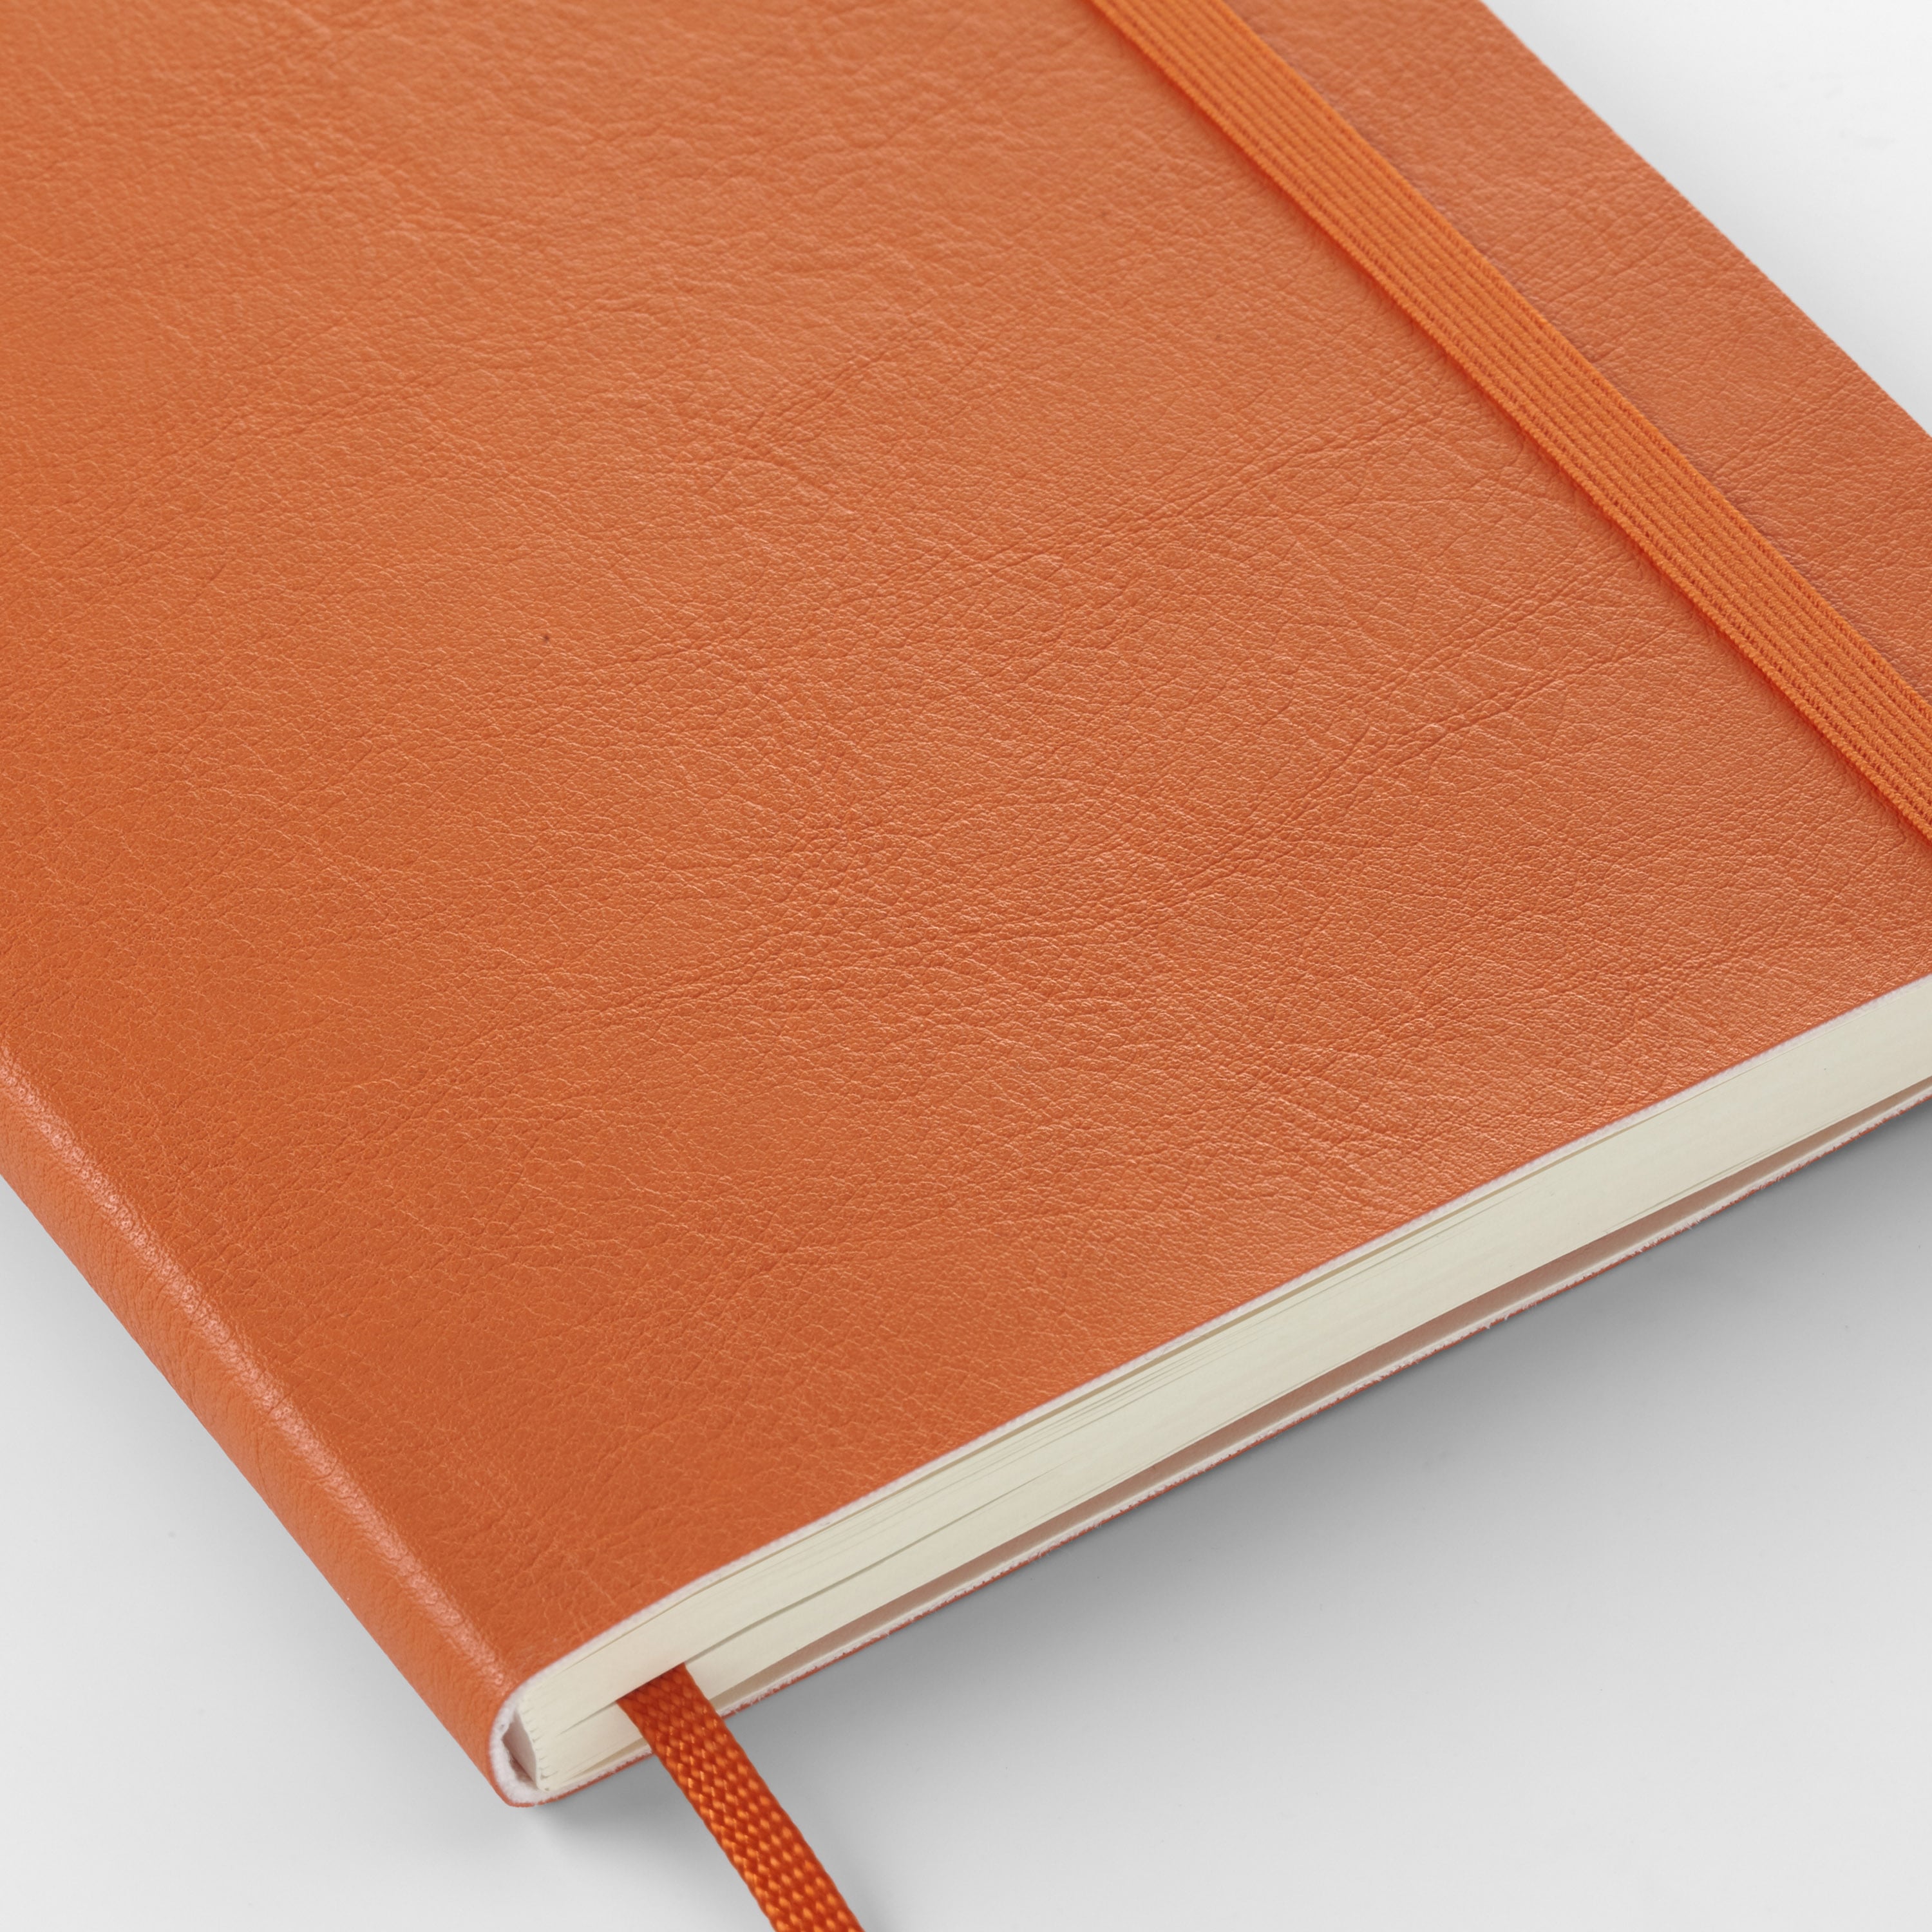 Sketchbook: Two Tone Orange 8x10 - BLANK JOURNAL WITH NO LINES